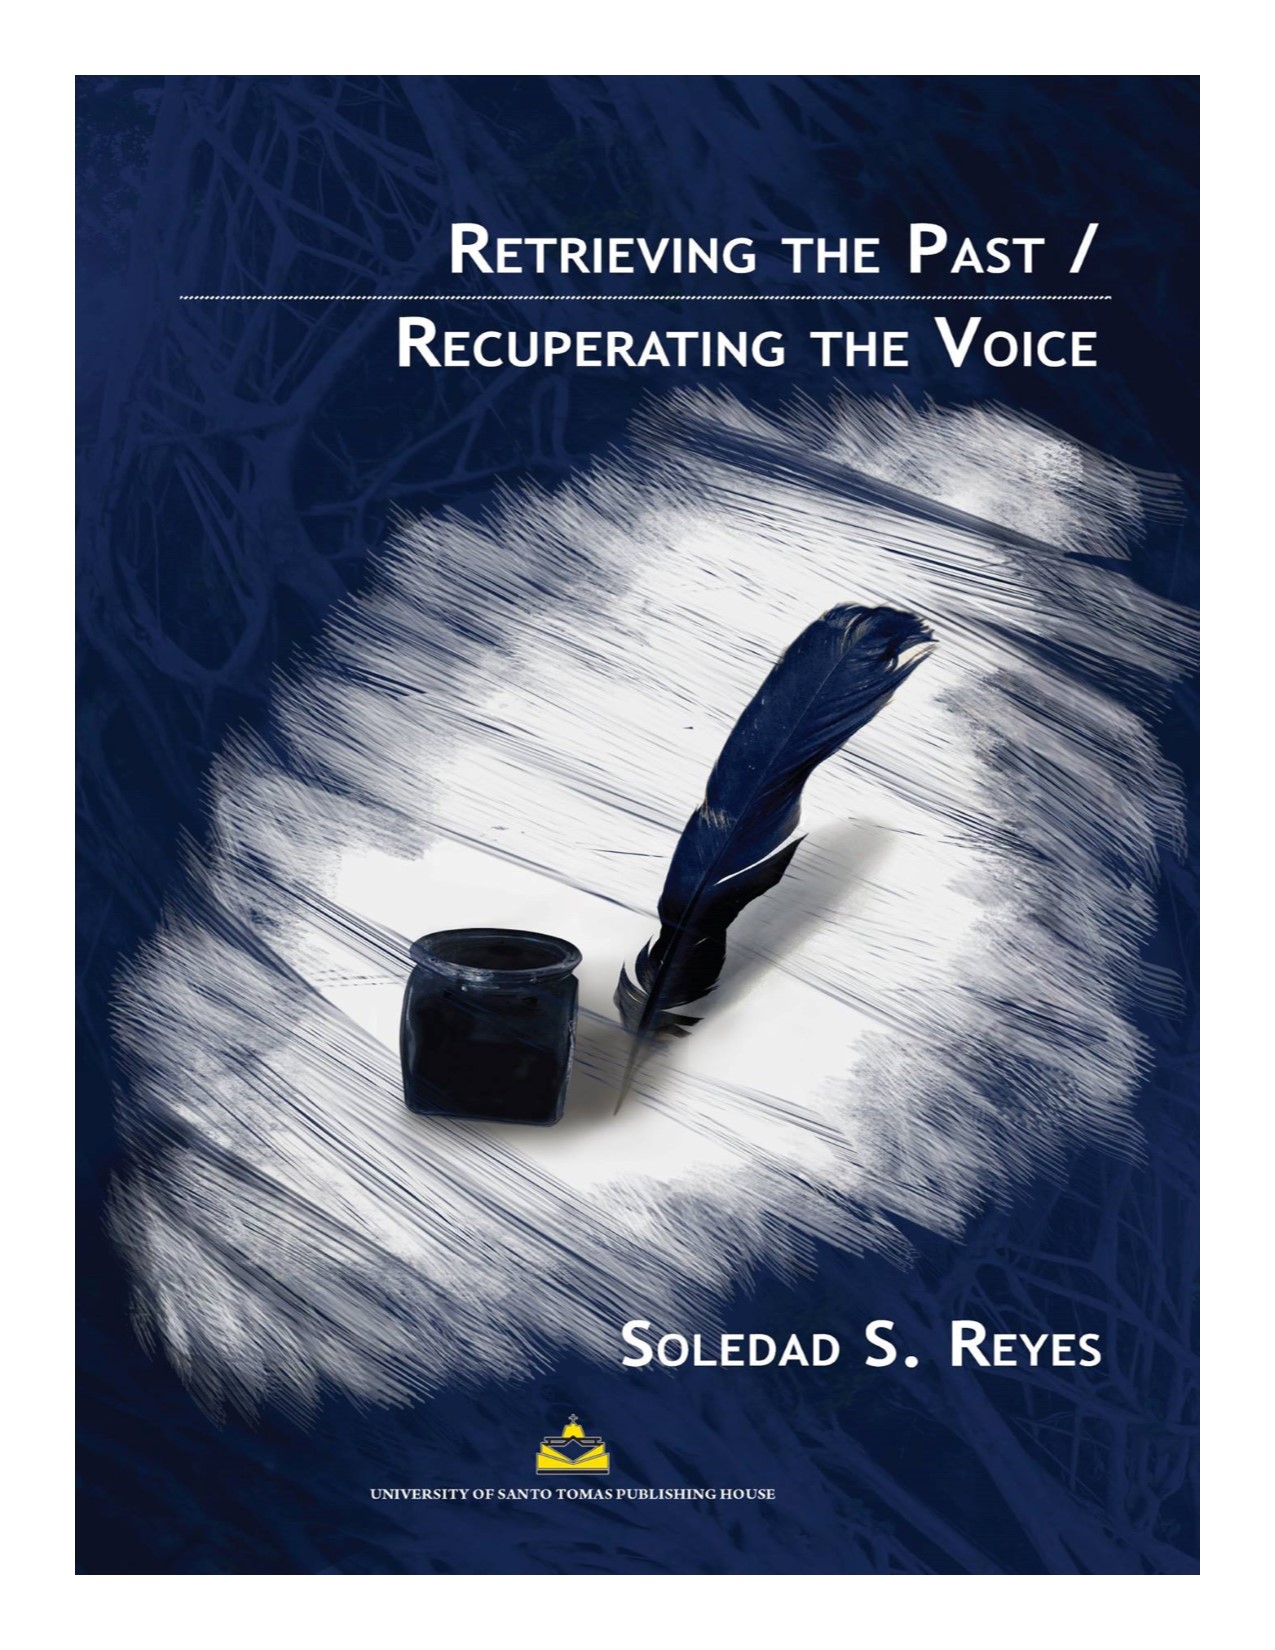 Retrieving the past / recuperating the voice